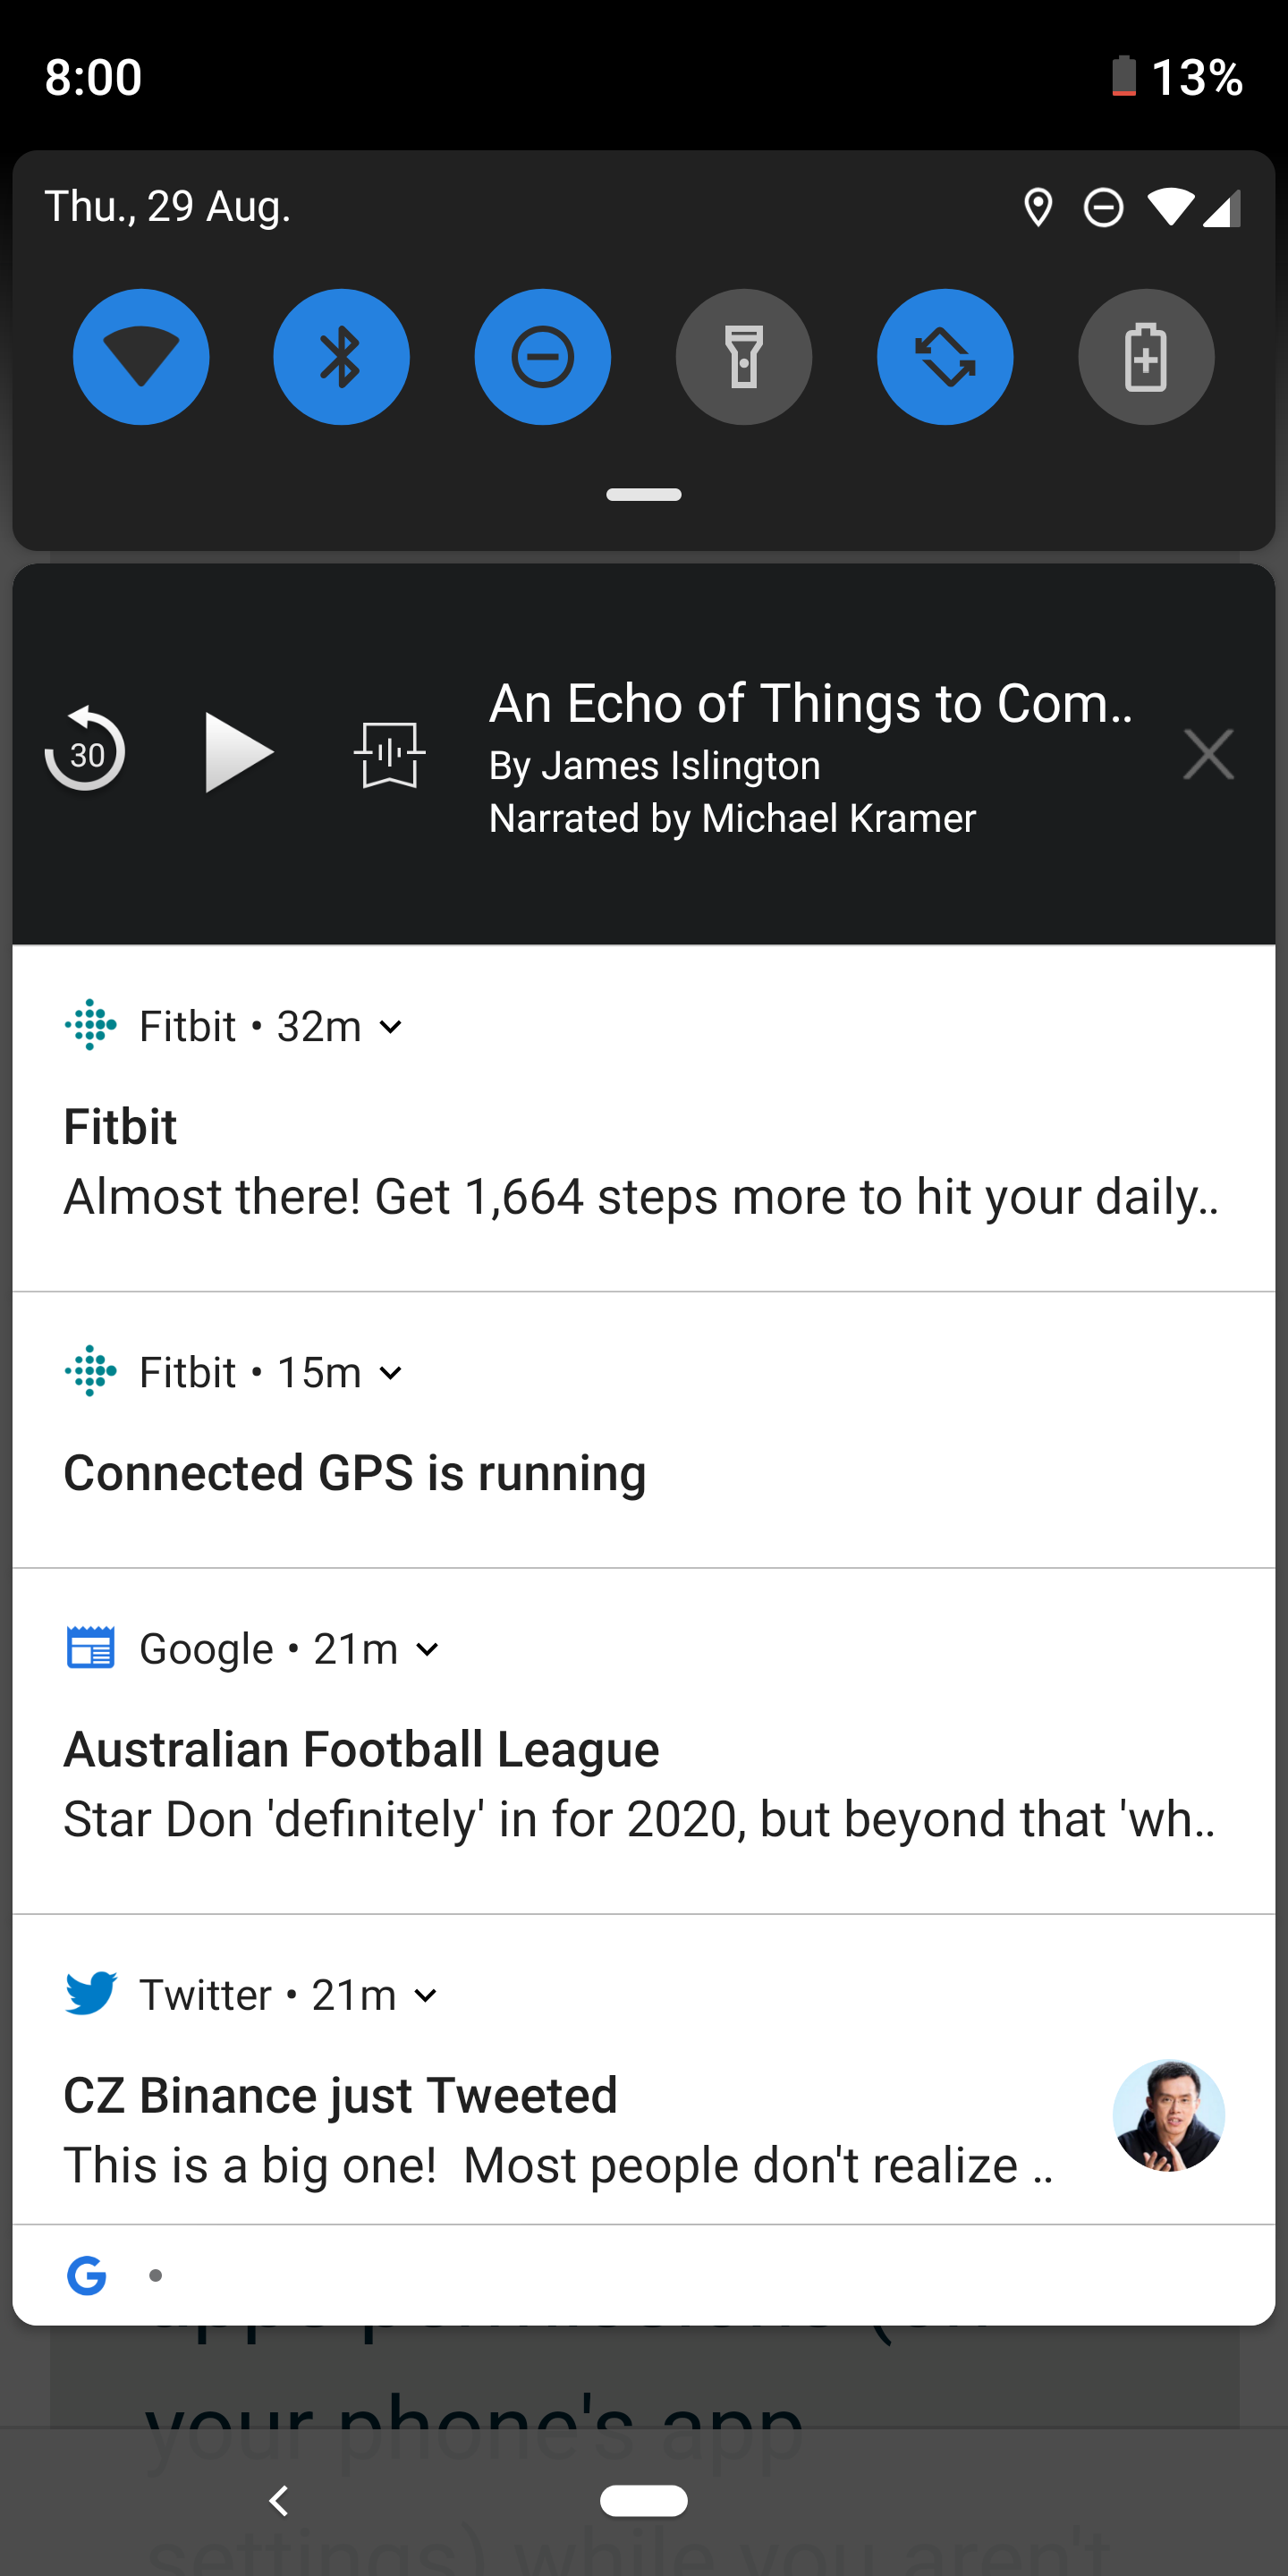 connected gps is running fitbit